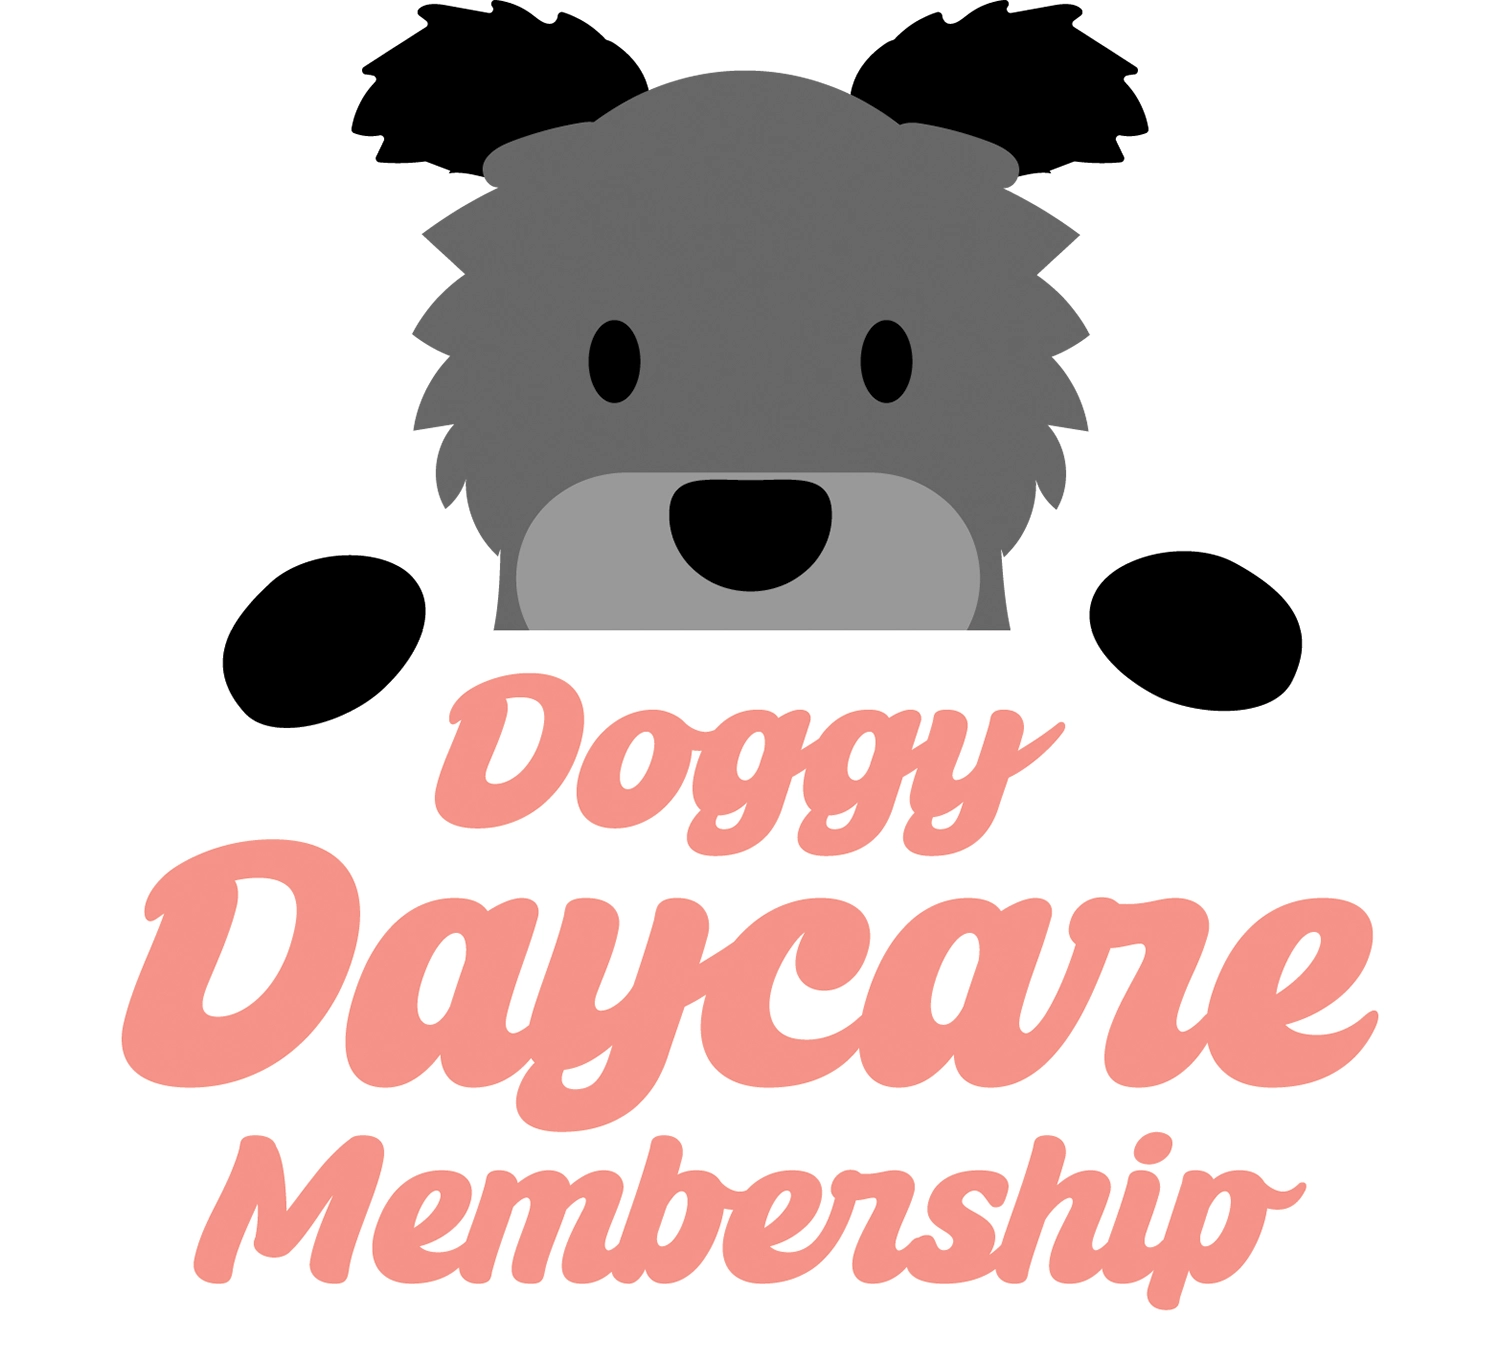 Doggy Daycare Membership typography with a vector illustration of a gray dog